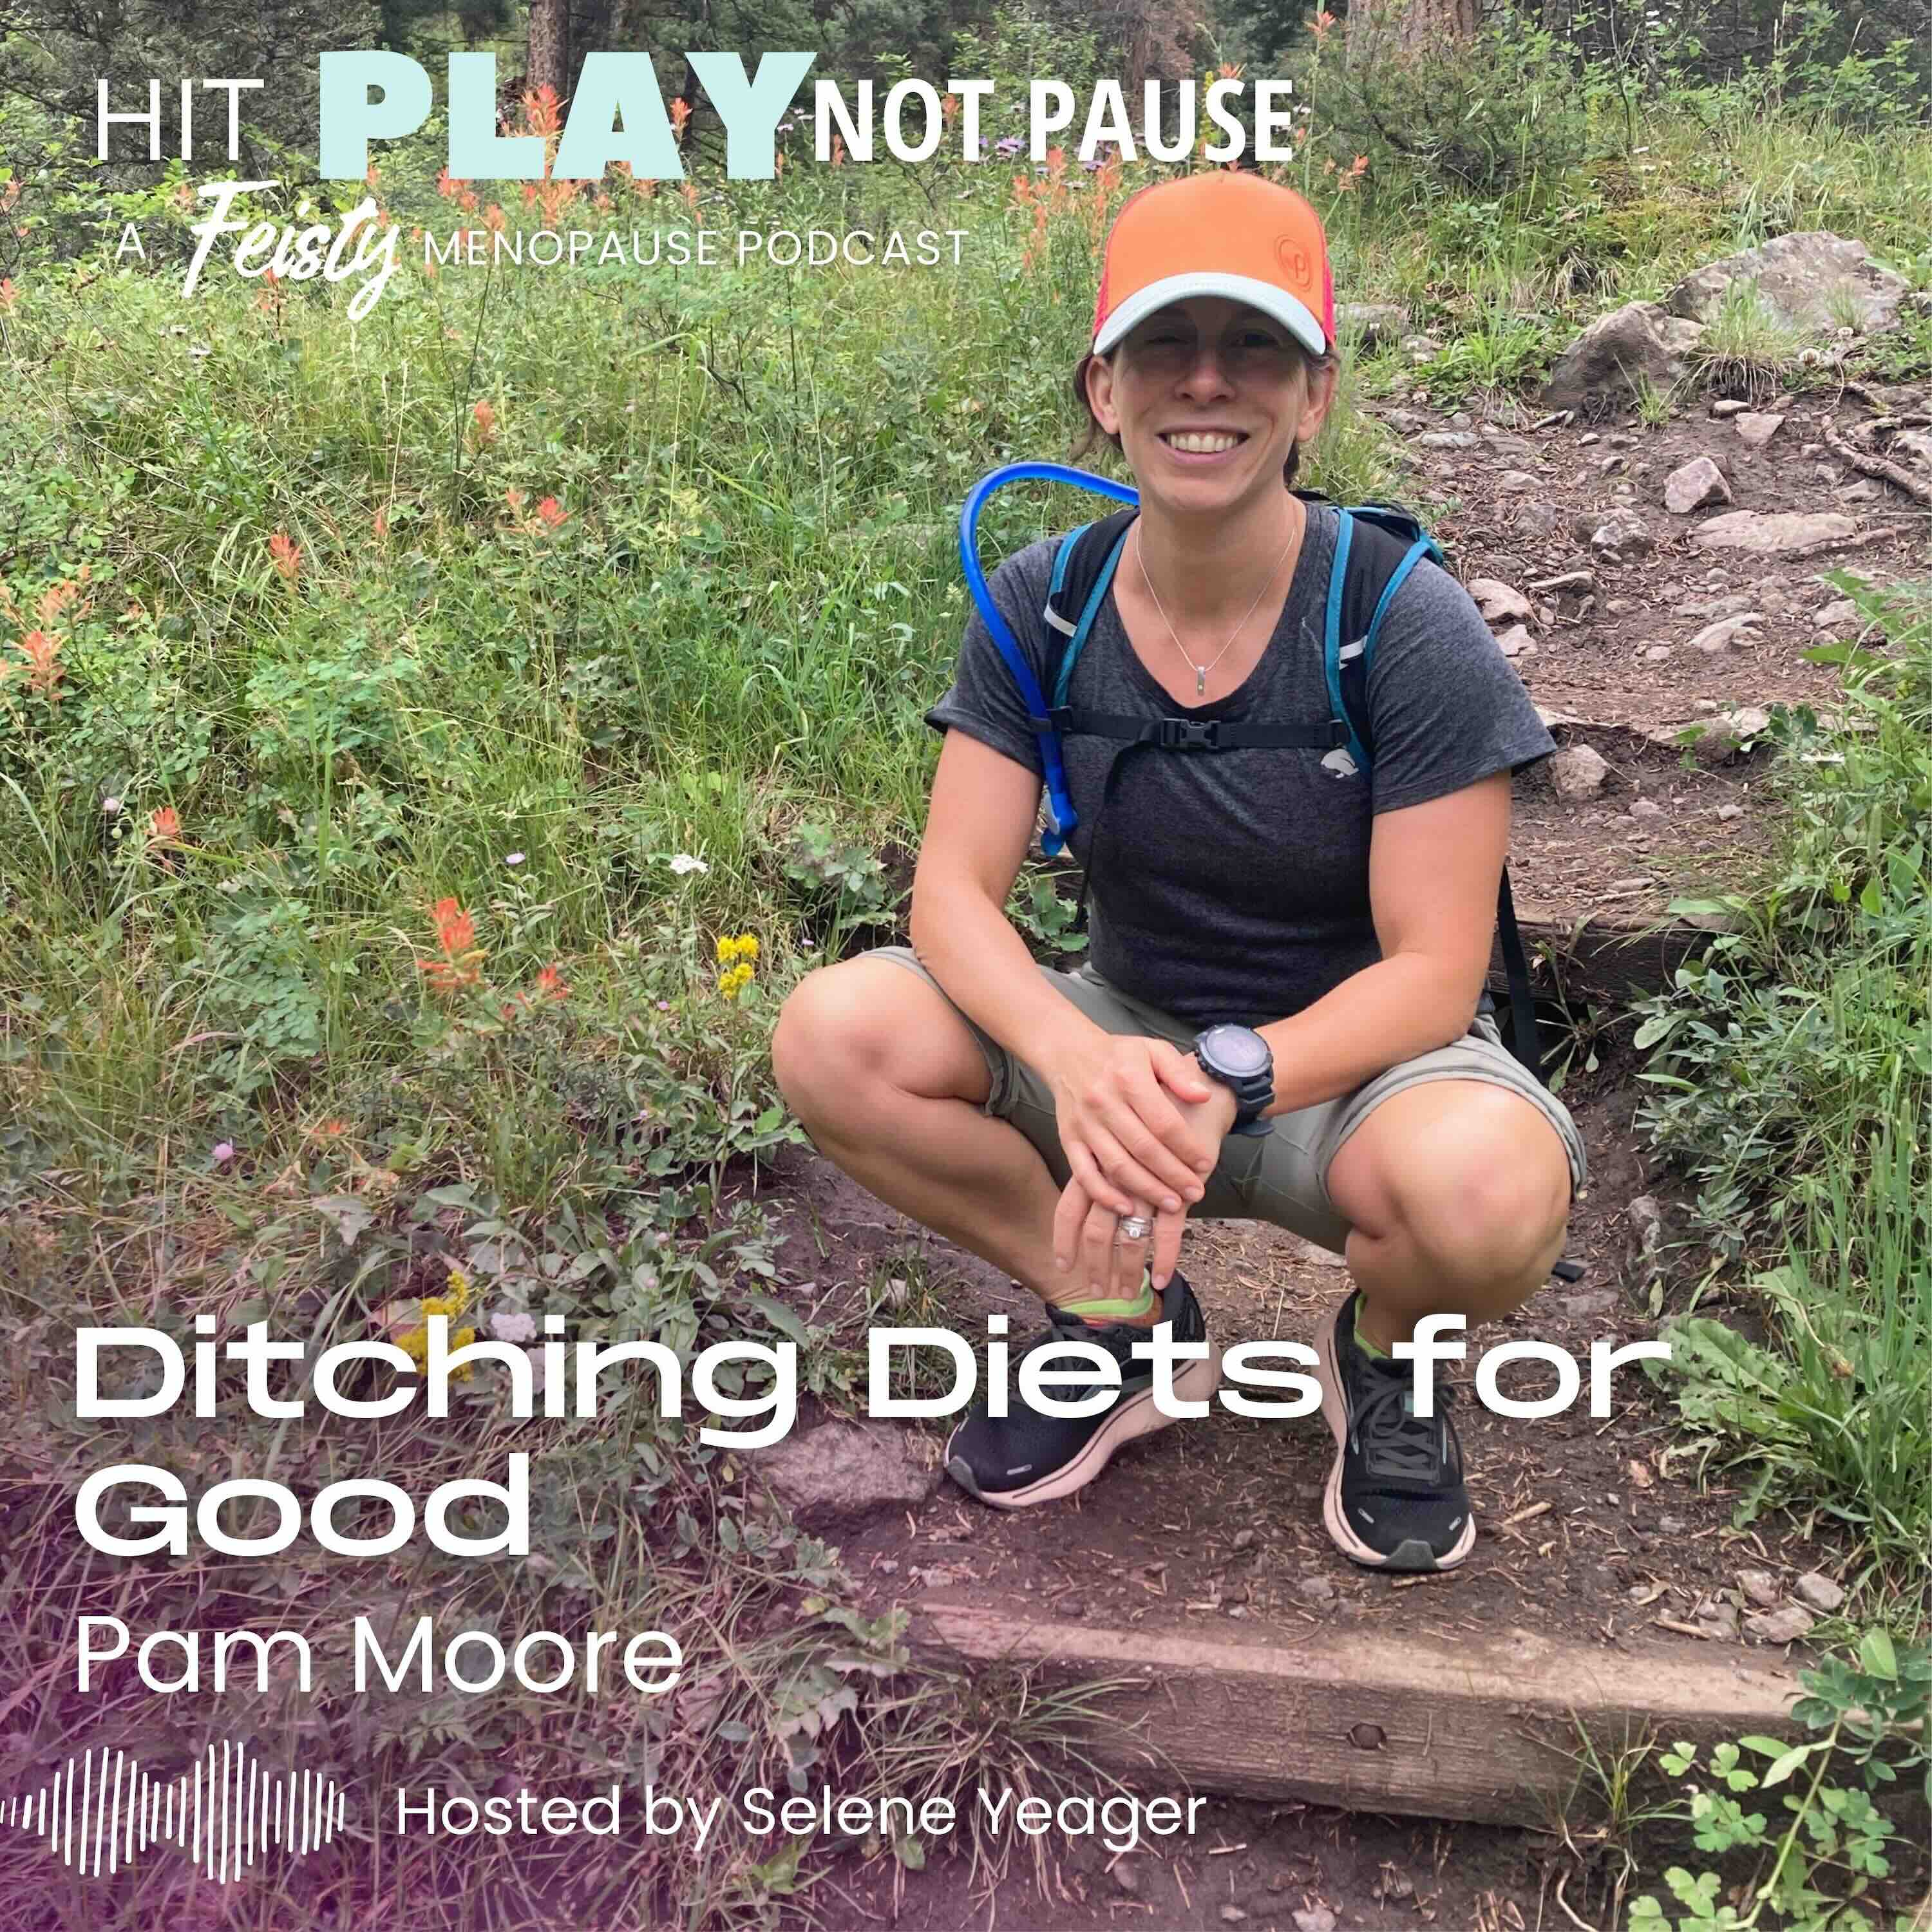 Ditching Diets for Good with Pam Moore (Episode 163)